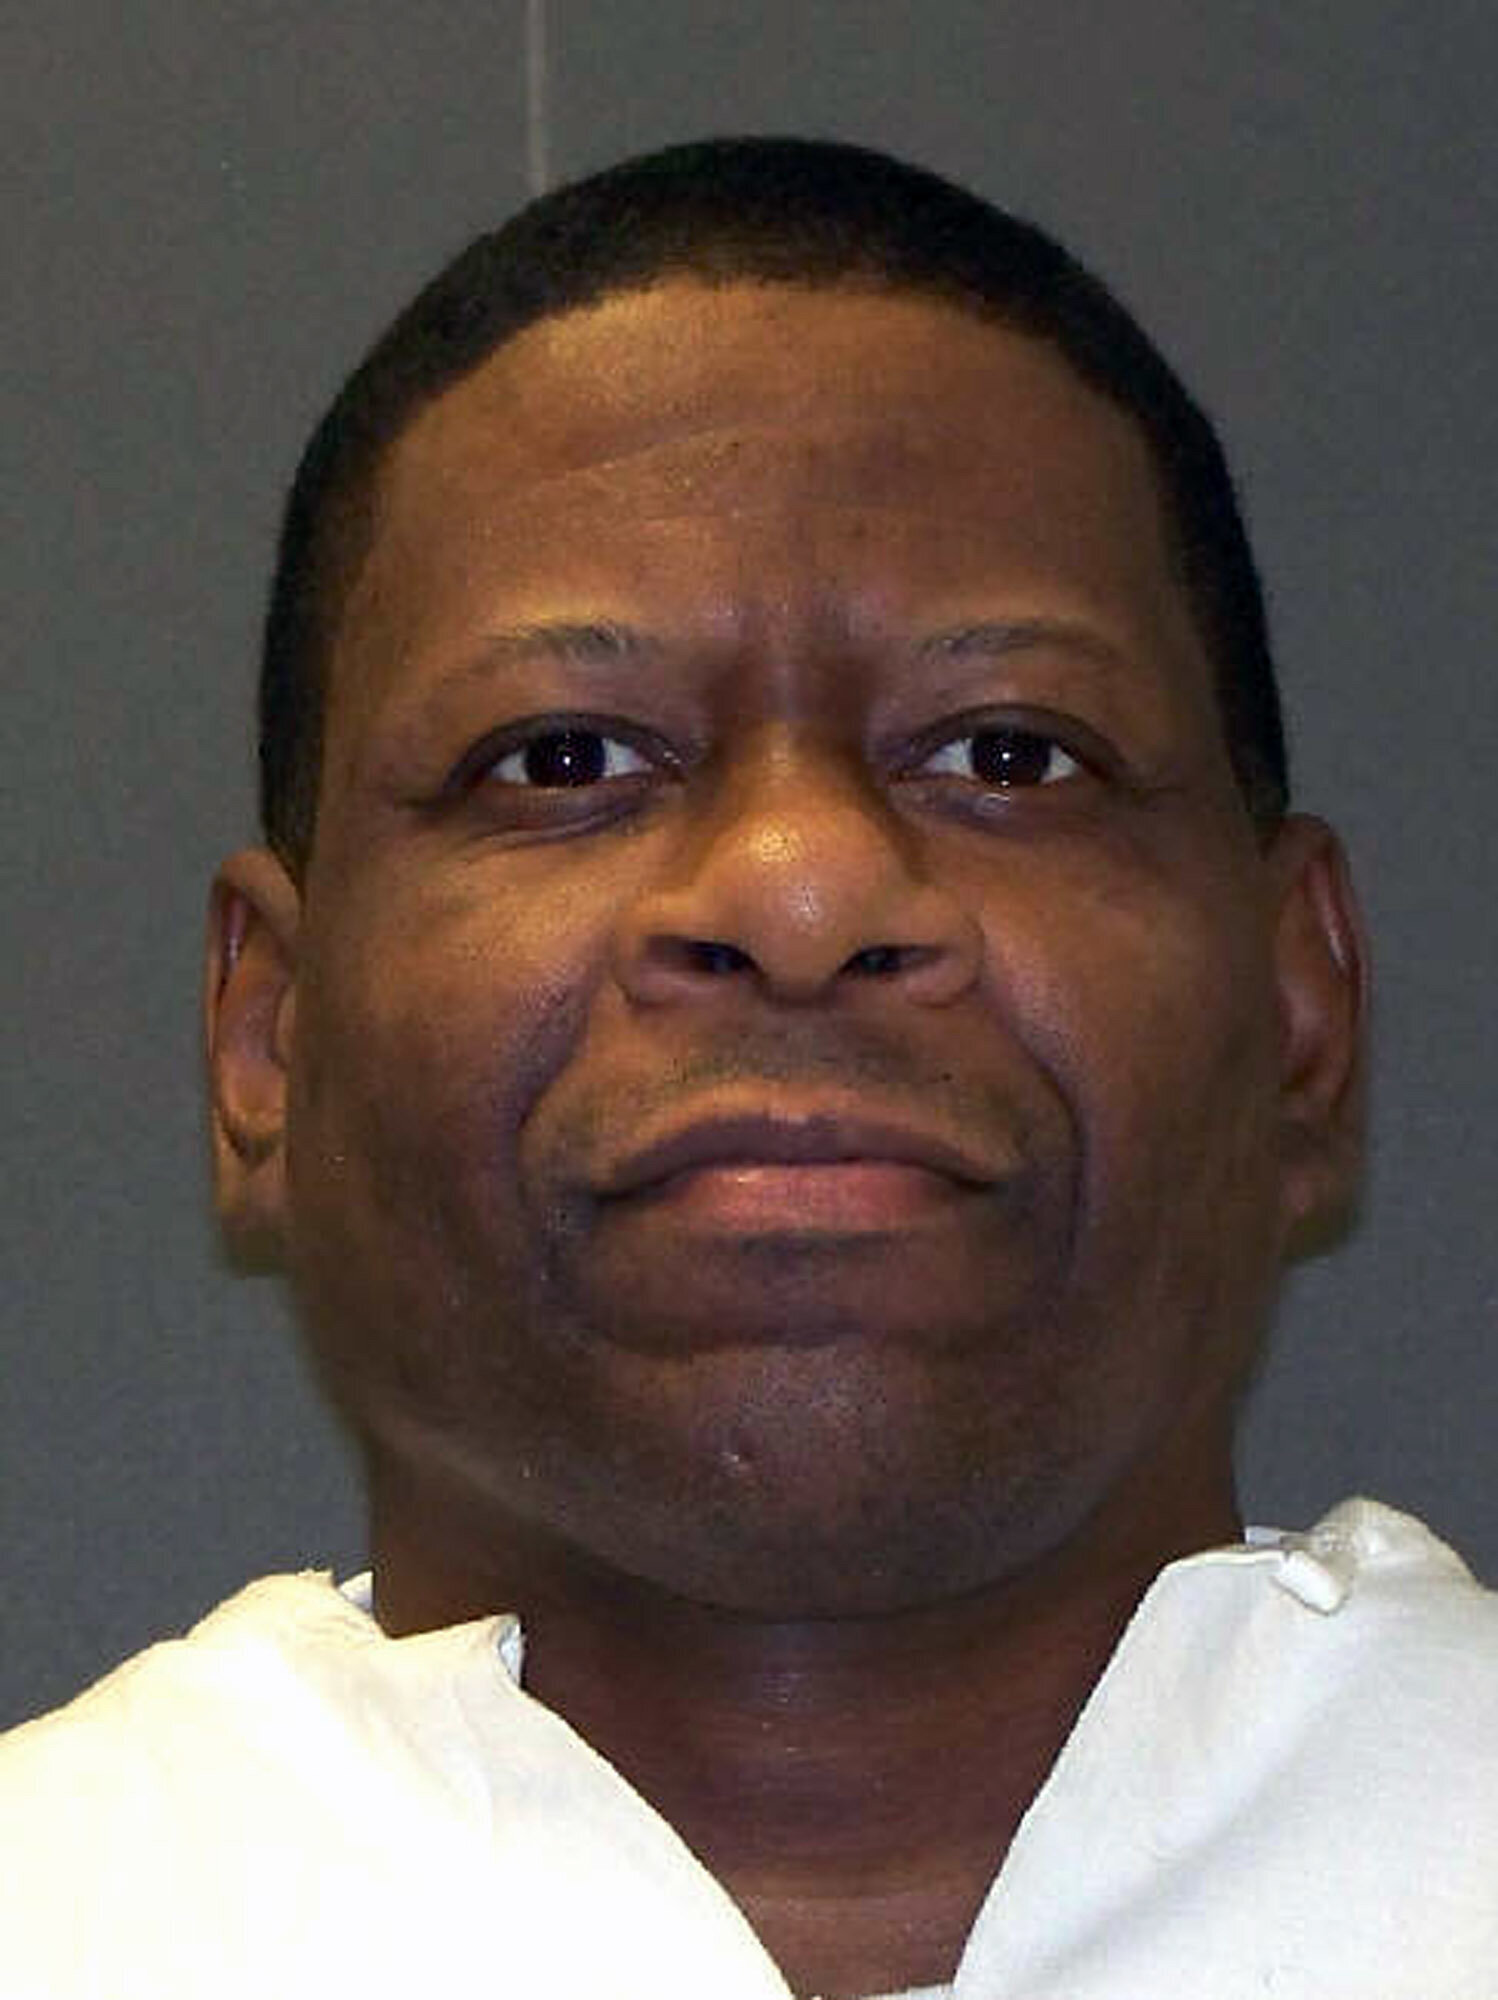 MAJOR: Texas Court Stays Execution Of Rodney Reed